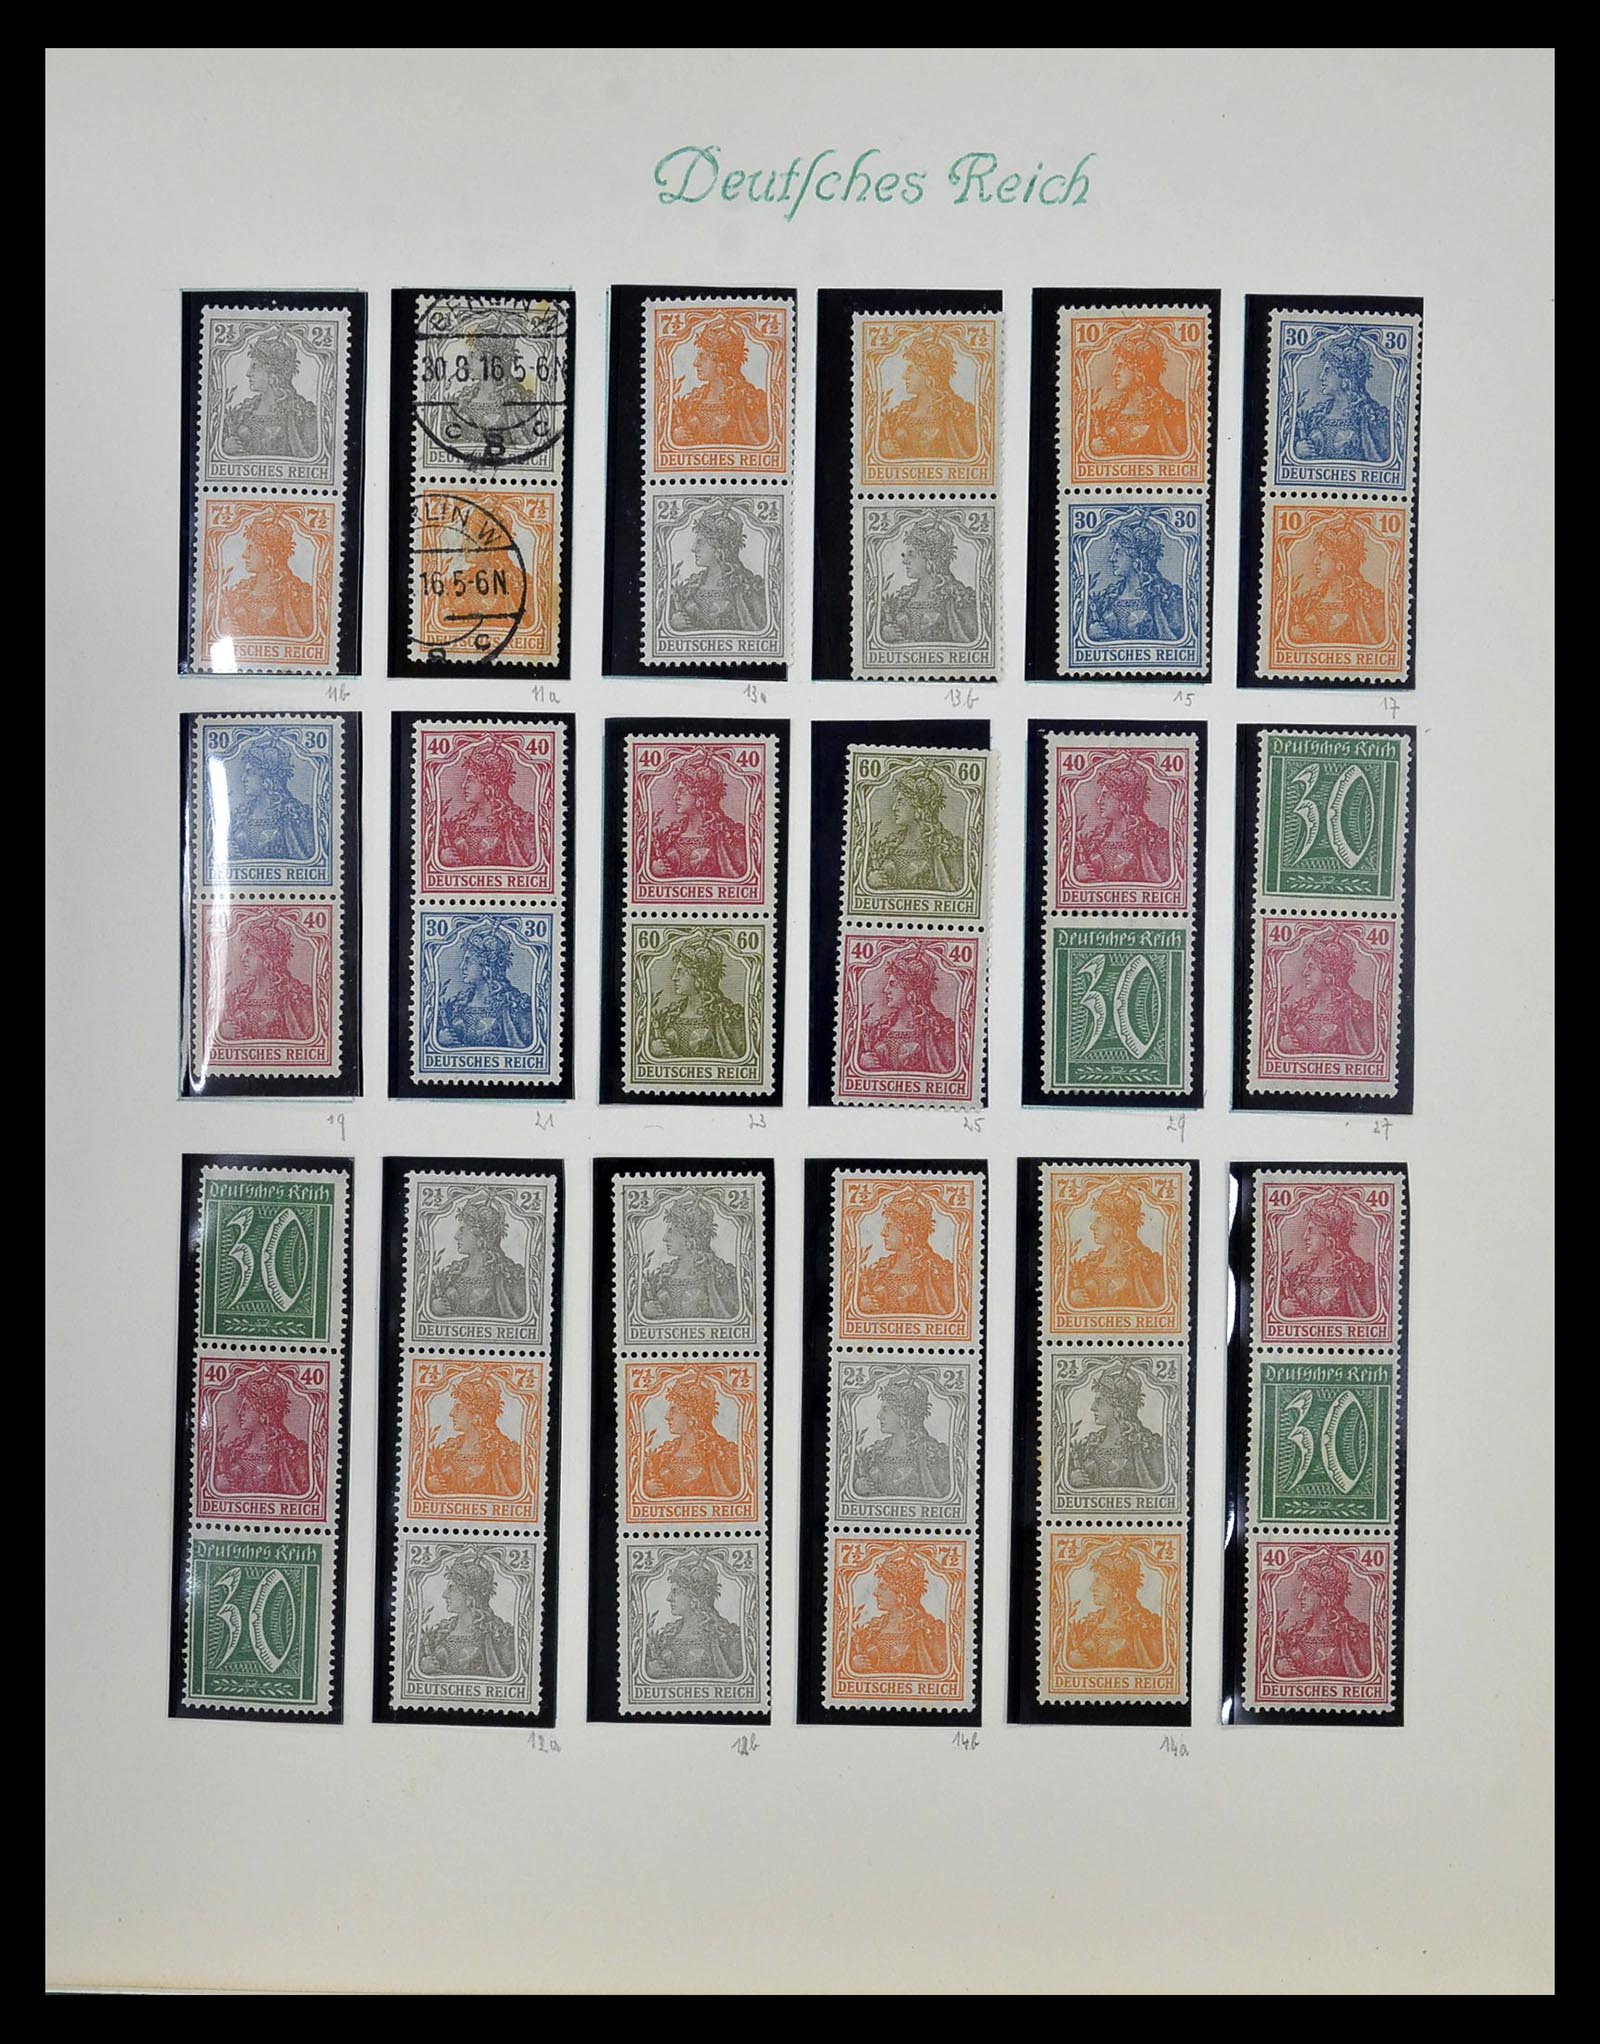 35039 004 - Stamp Collection 35039 German Reich combinations 1910-1941.